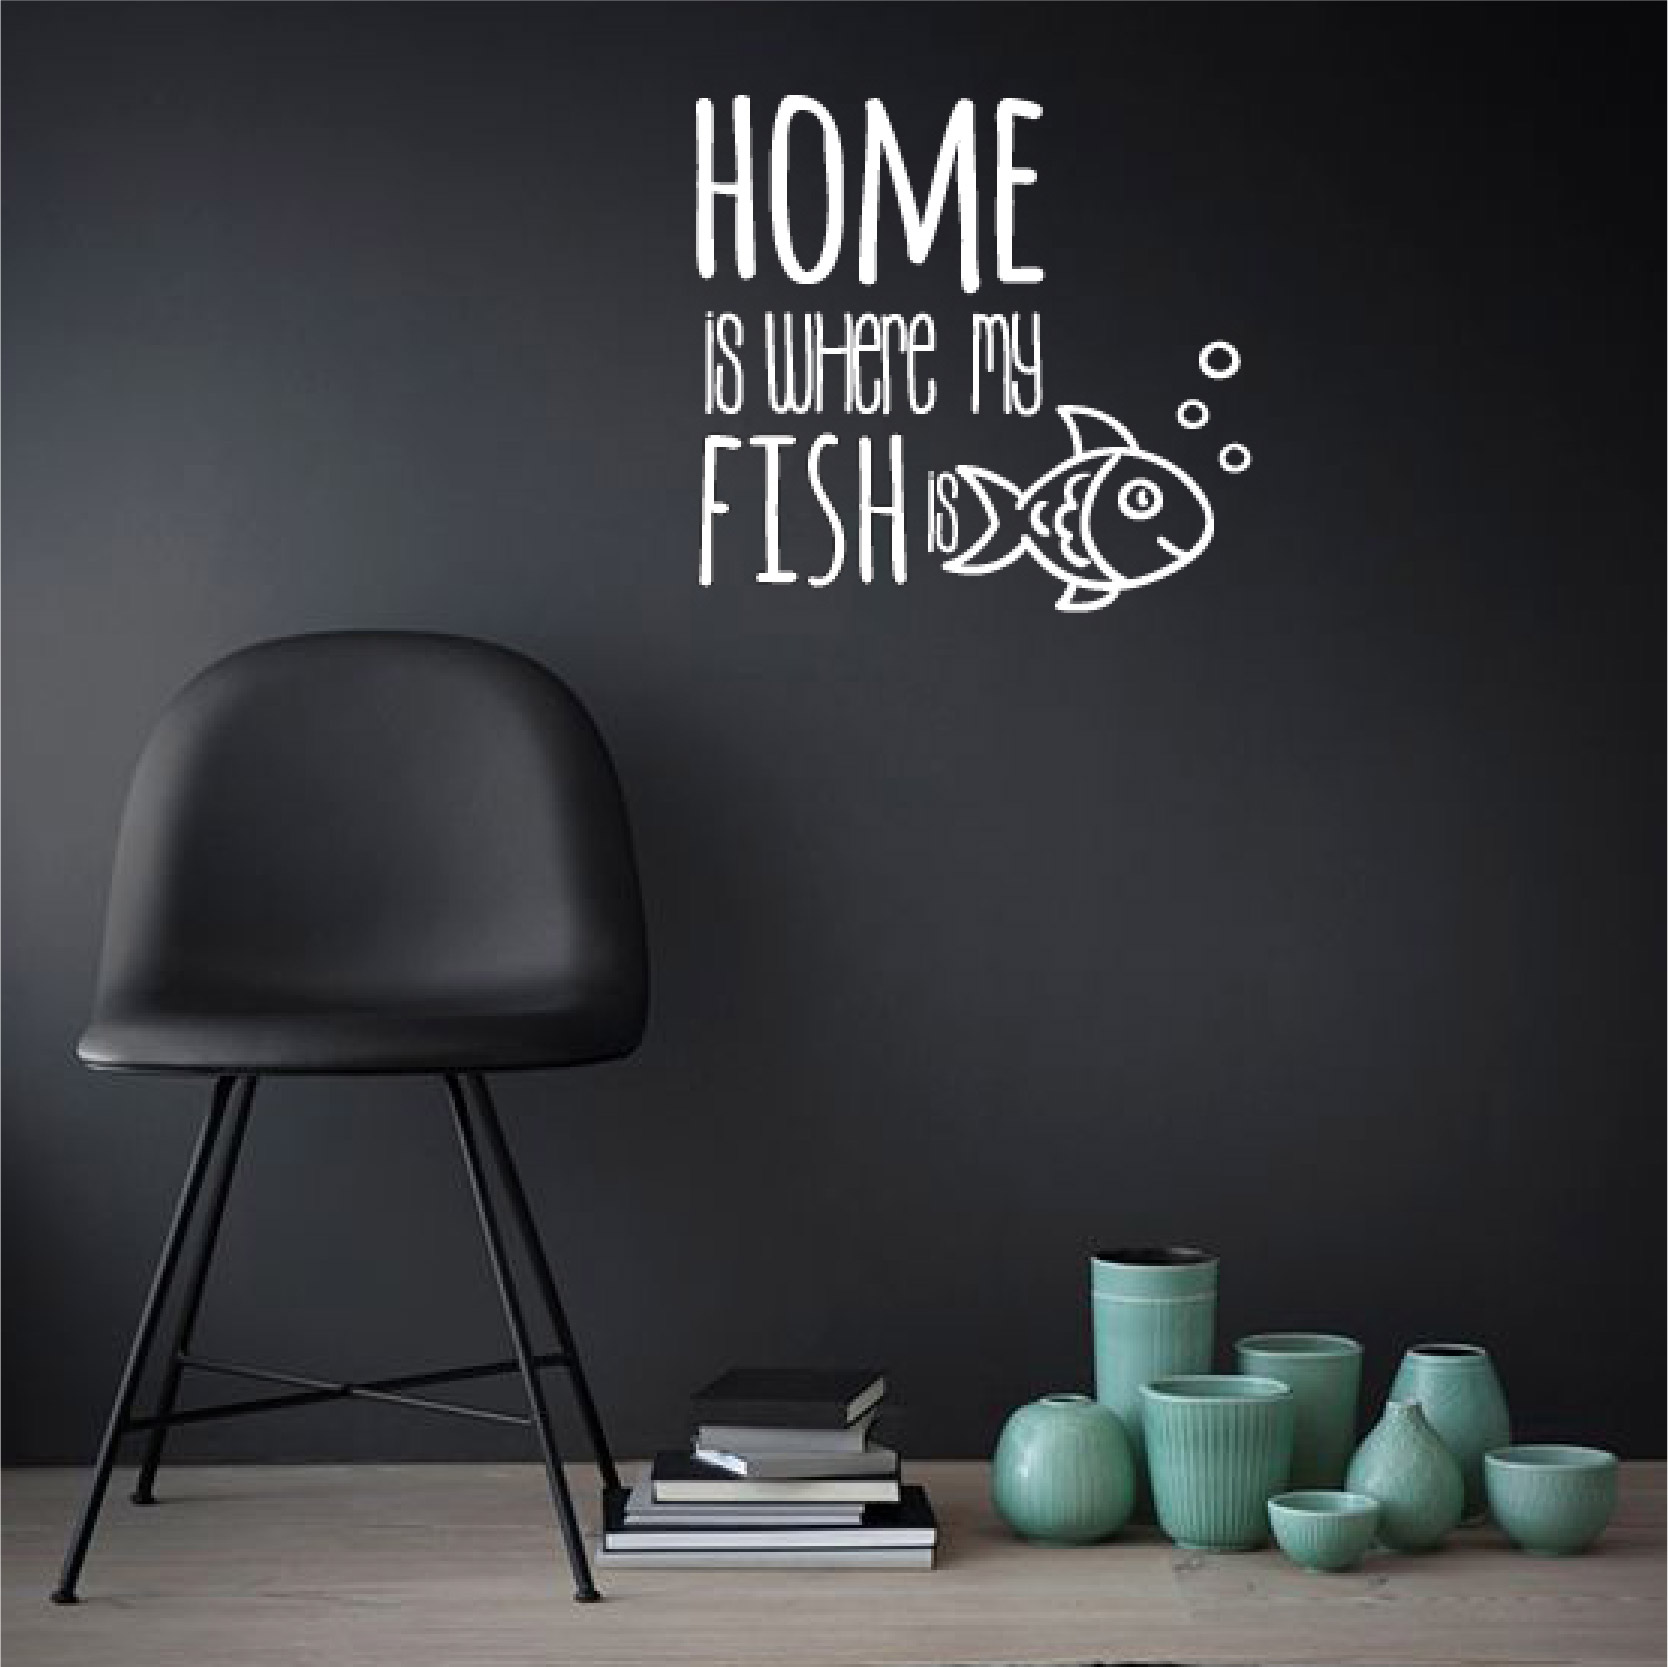 Home is where my fish is - branco